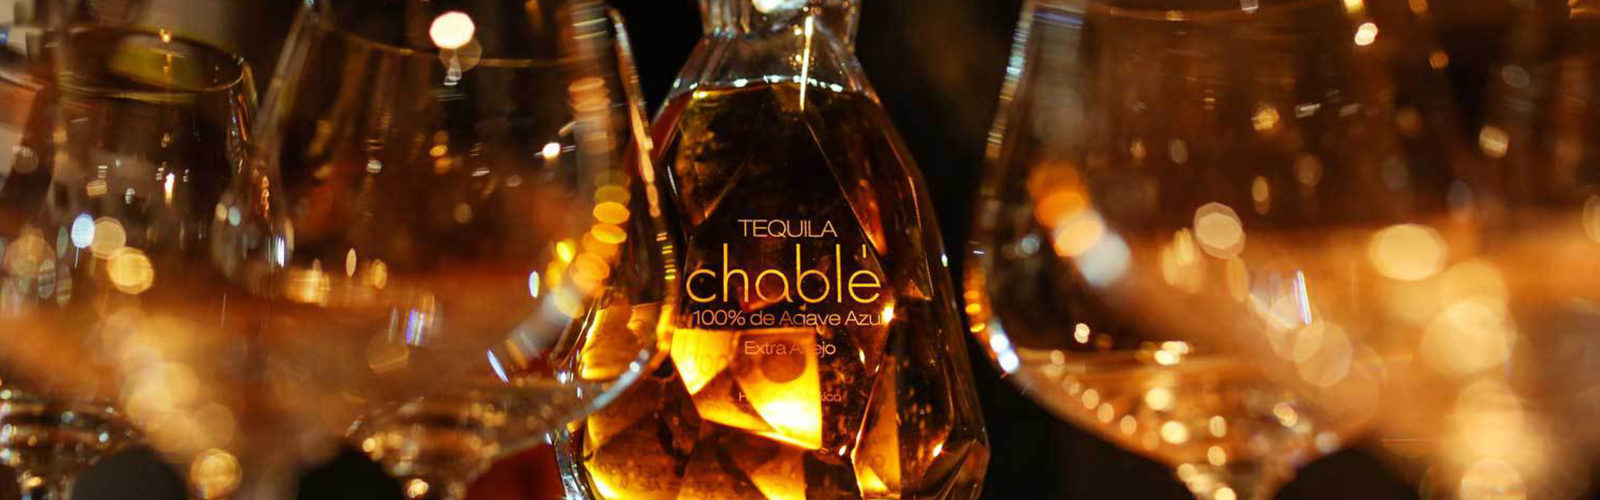 Chable tequila